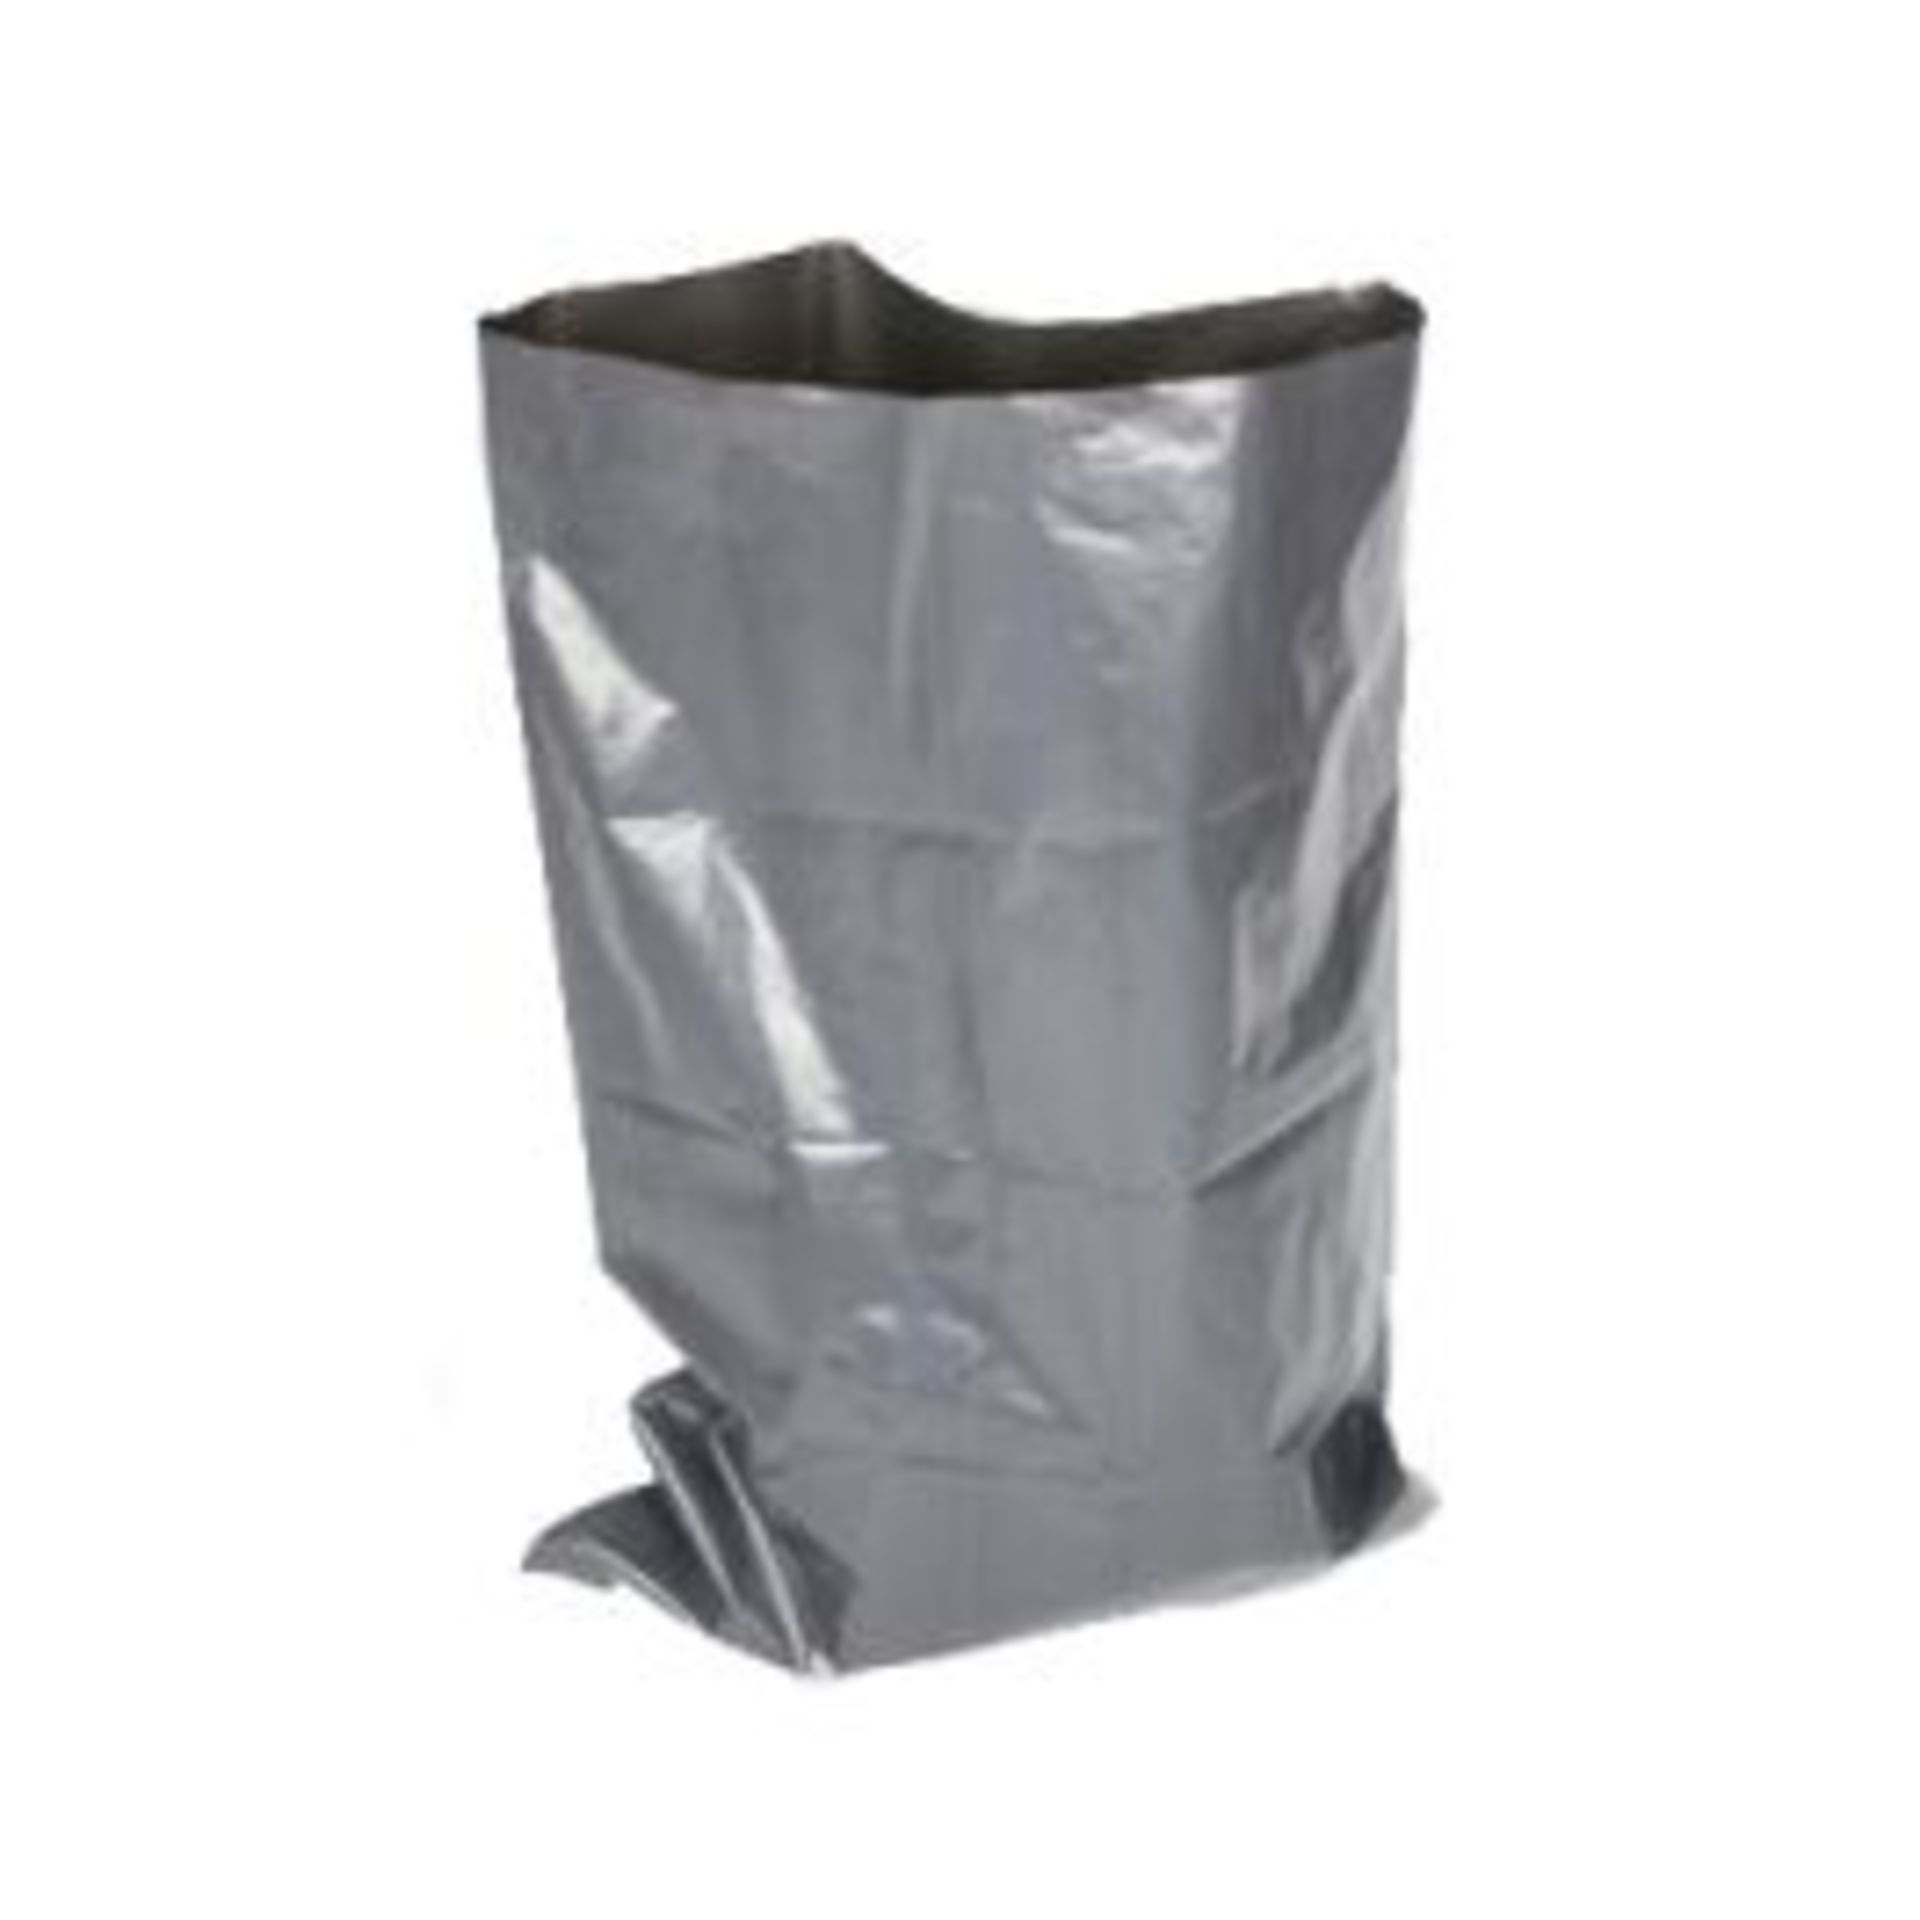 5 X BRAND NEW PACKS OF 100 GREY RUBBLE BAGS R15-7